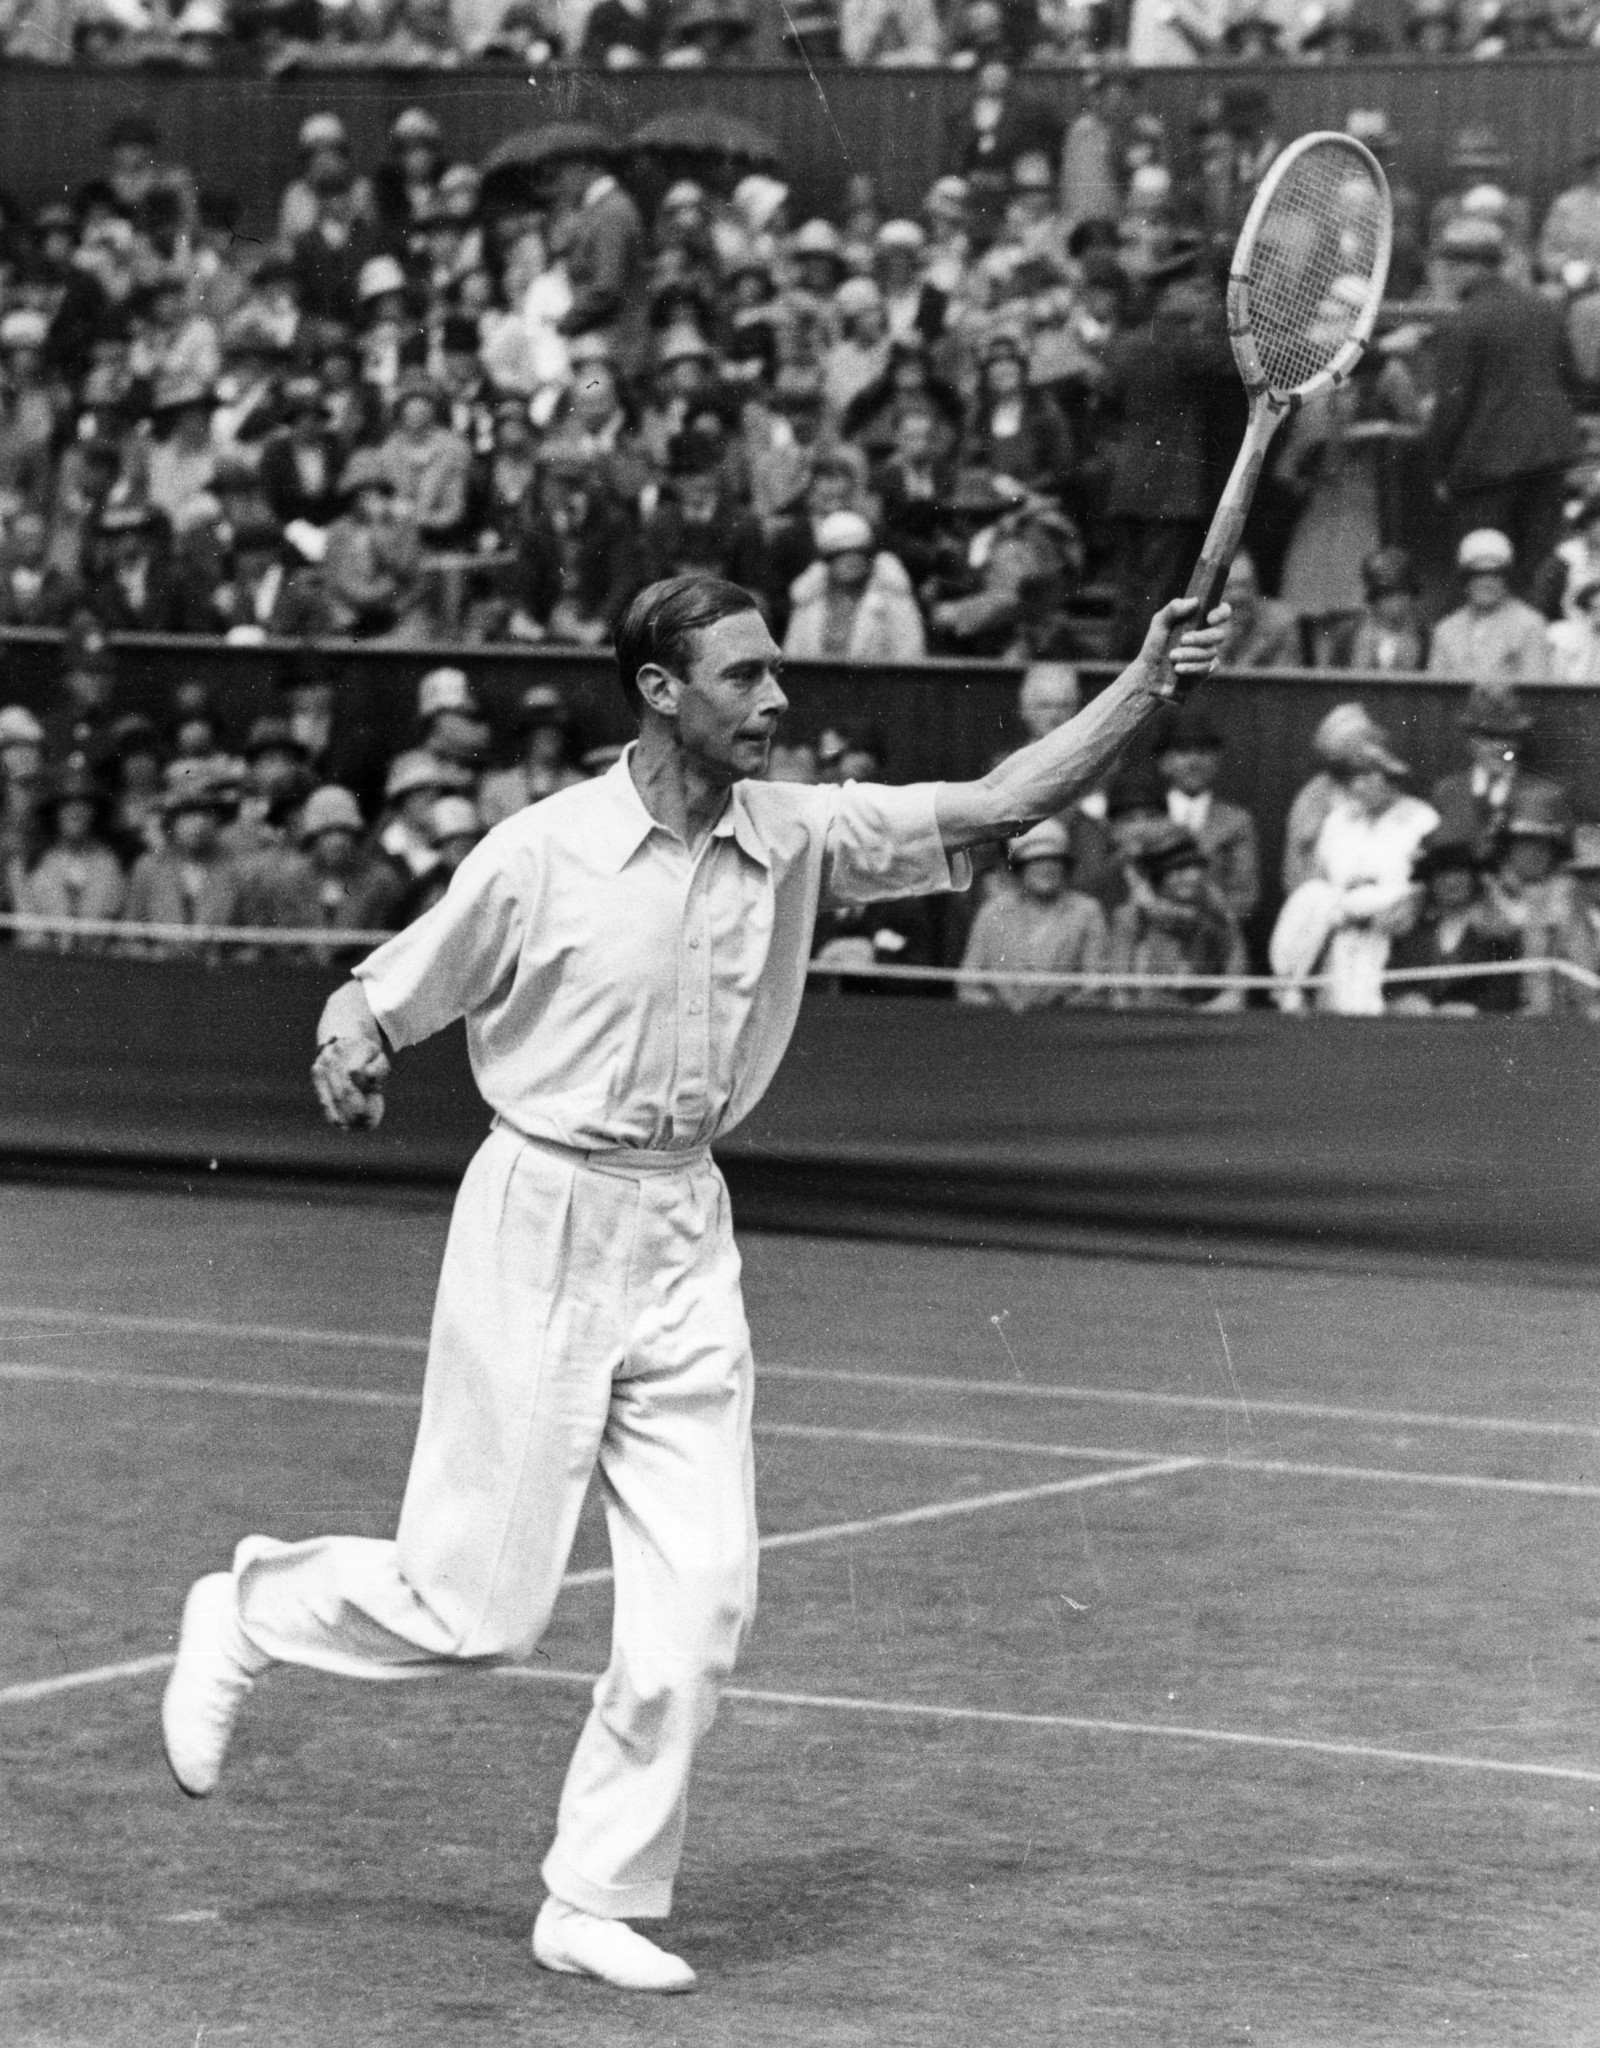 King Charles III's grandfather played at Wimbledon in 1926 when he was still known as the Duke of York ©Getty Images